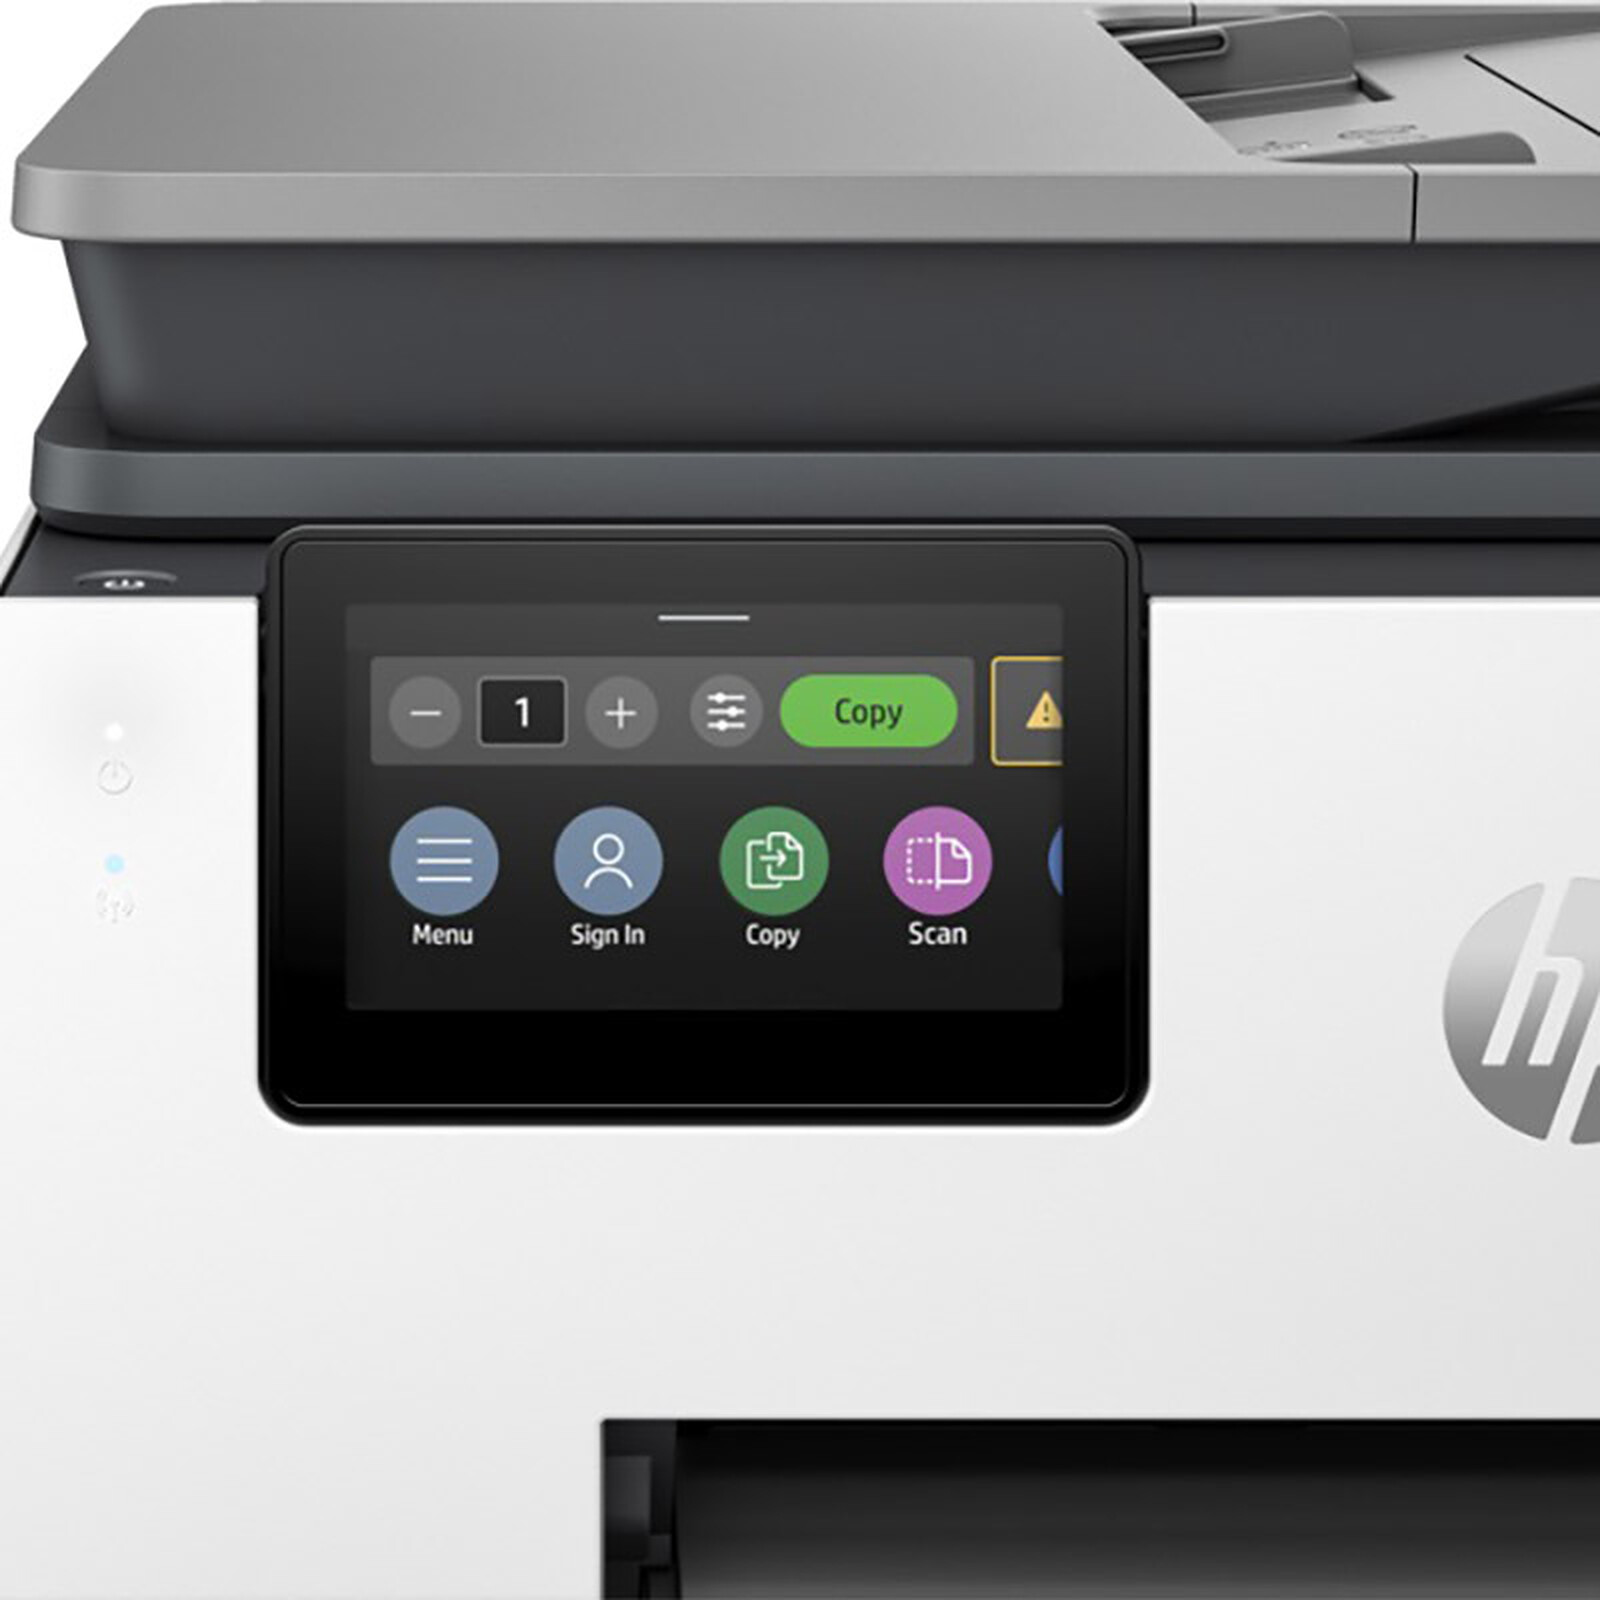 HP Officejet Pro 8730 All-in-One Imprimante multifonctions couleur jet  d'encre A4